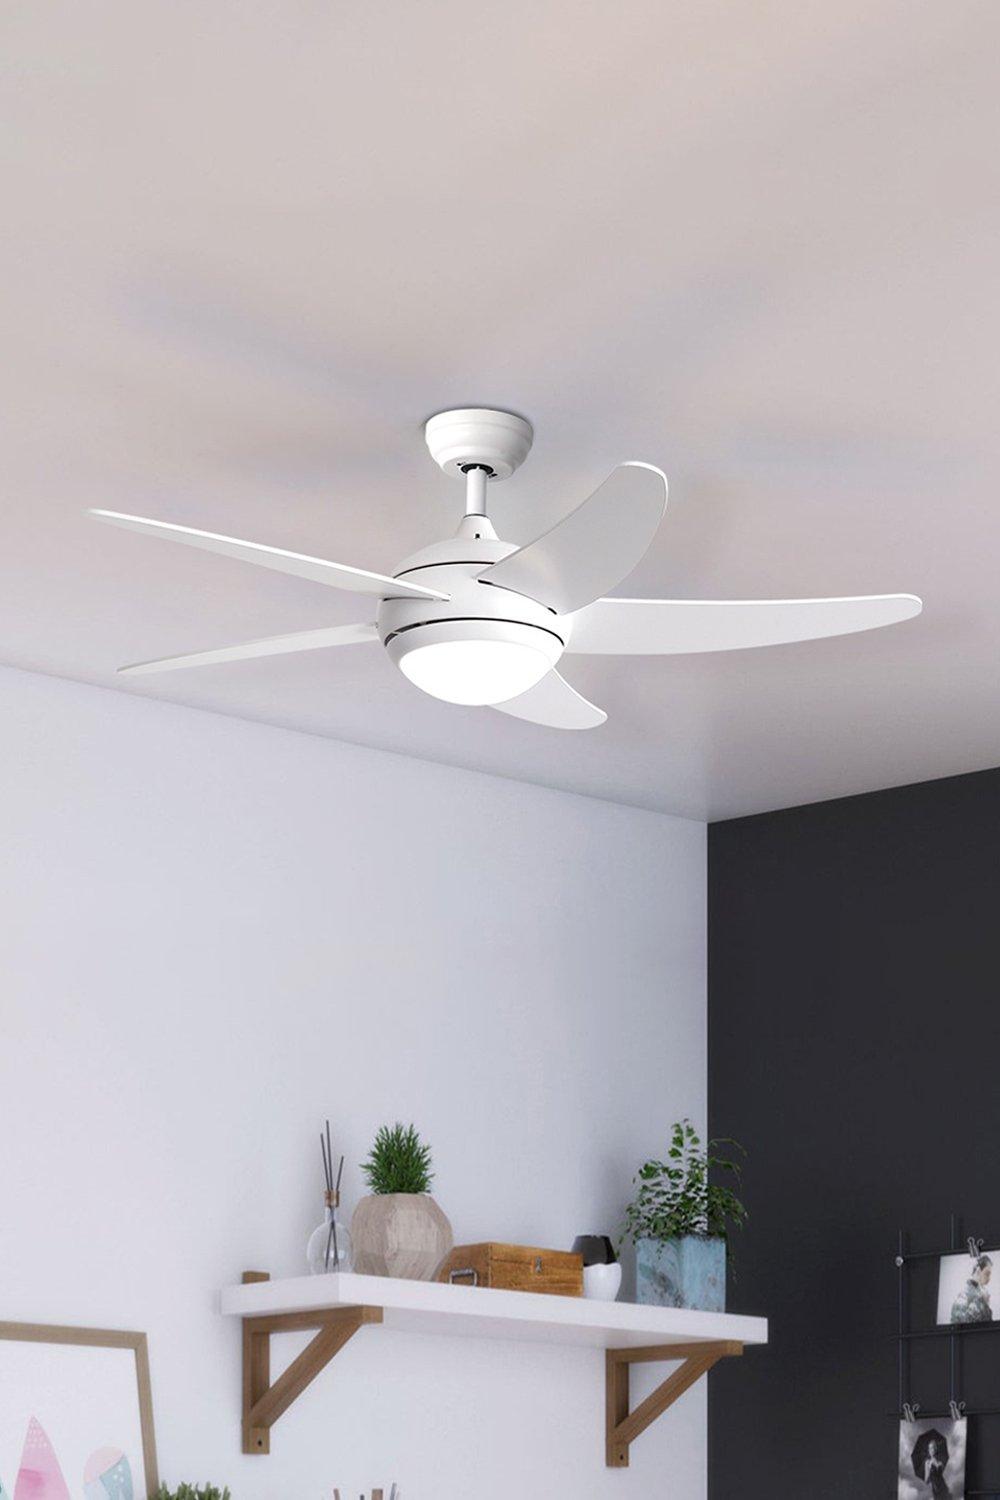 5-Blade LED Ceiling Fan with Light